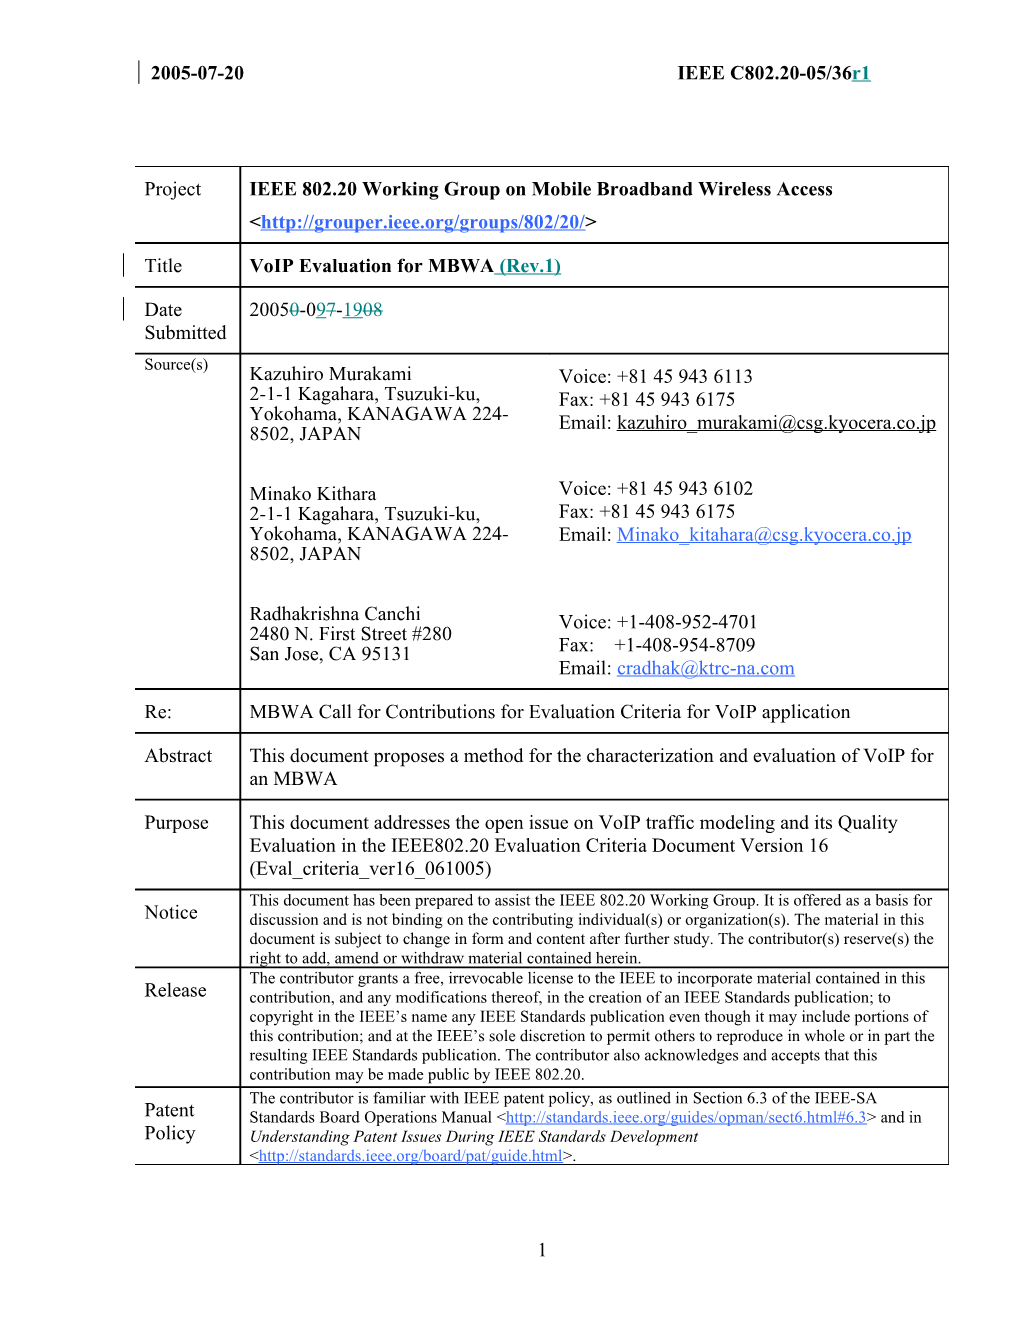 System Requirements for IEEE 802.20 Mobile Broadband Wireless Access Systems-Version 14